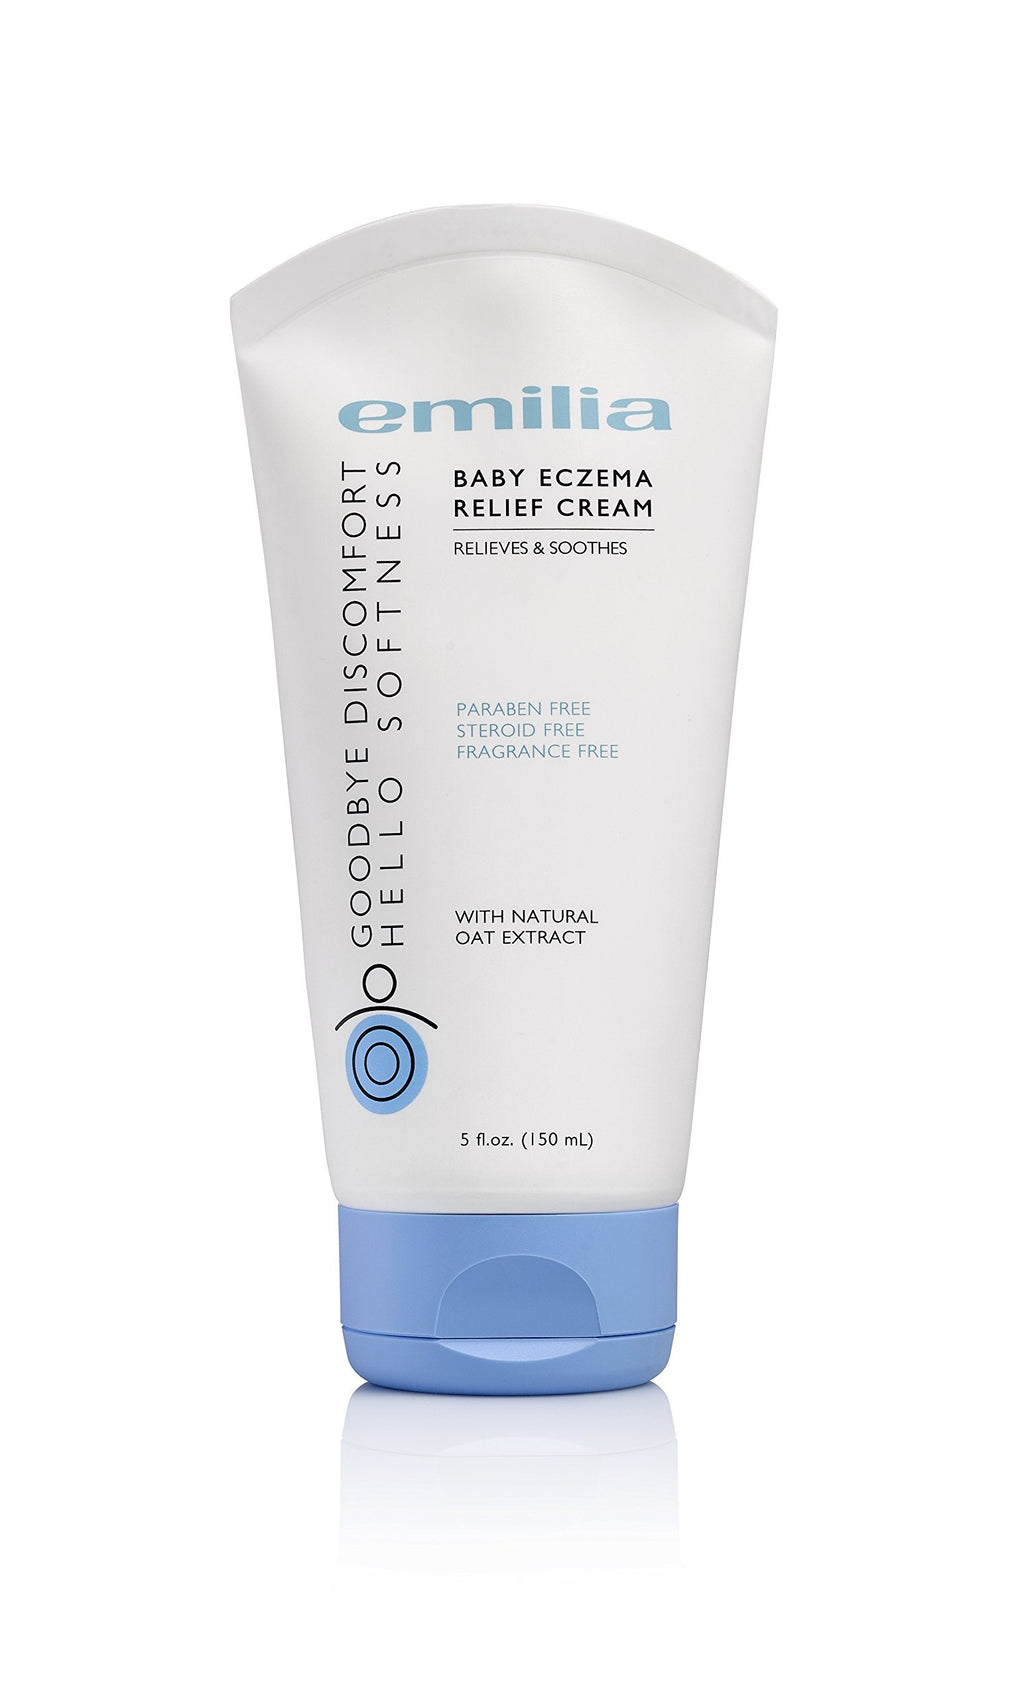 [Australia] - Emilia Eczema Relief Cream for Baby and Toddler - Itch Therapy Lotion- Steroid-Free Eczema Calming Rash Ointment with Natural Oat Extract for Healthier, Happier Skin - 5 Fl.oz. 